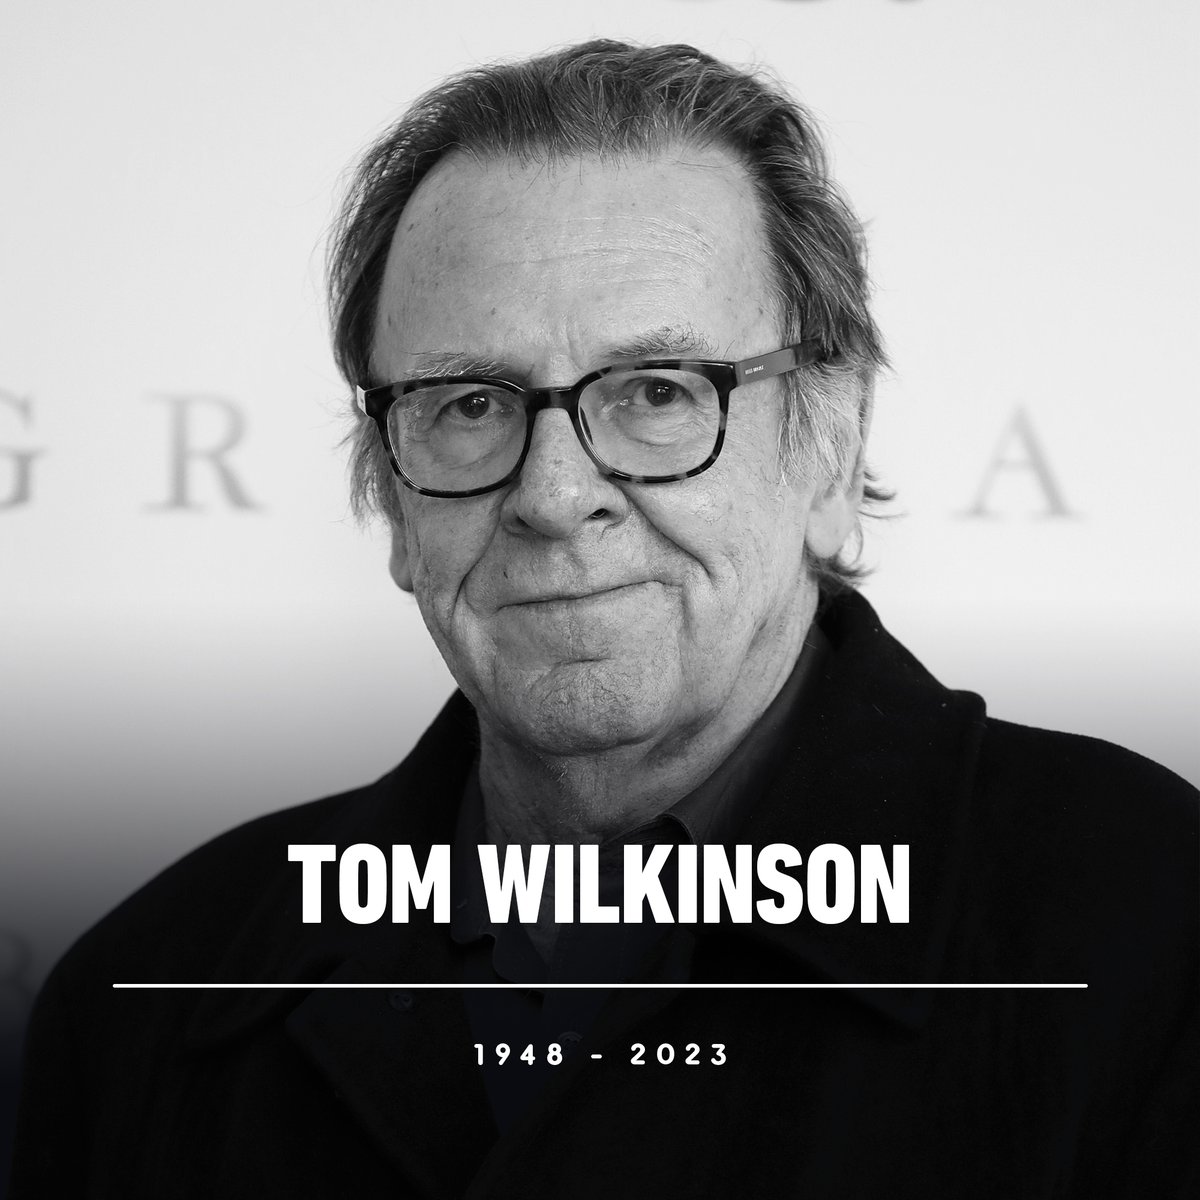 Oscar-nominated actor Tom Wilkinson, known for Batman Begins, The Full Monty, and Michael Clayton, has died aged 75.